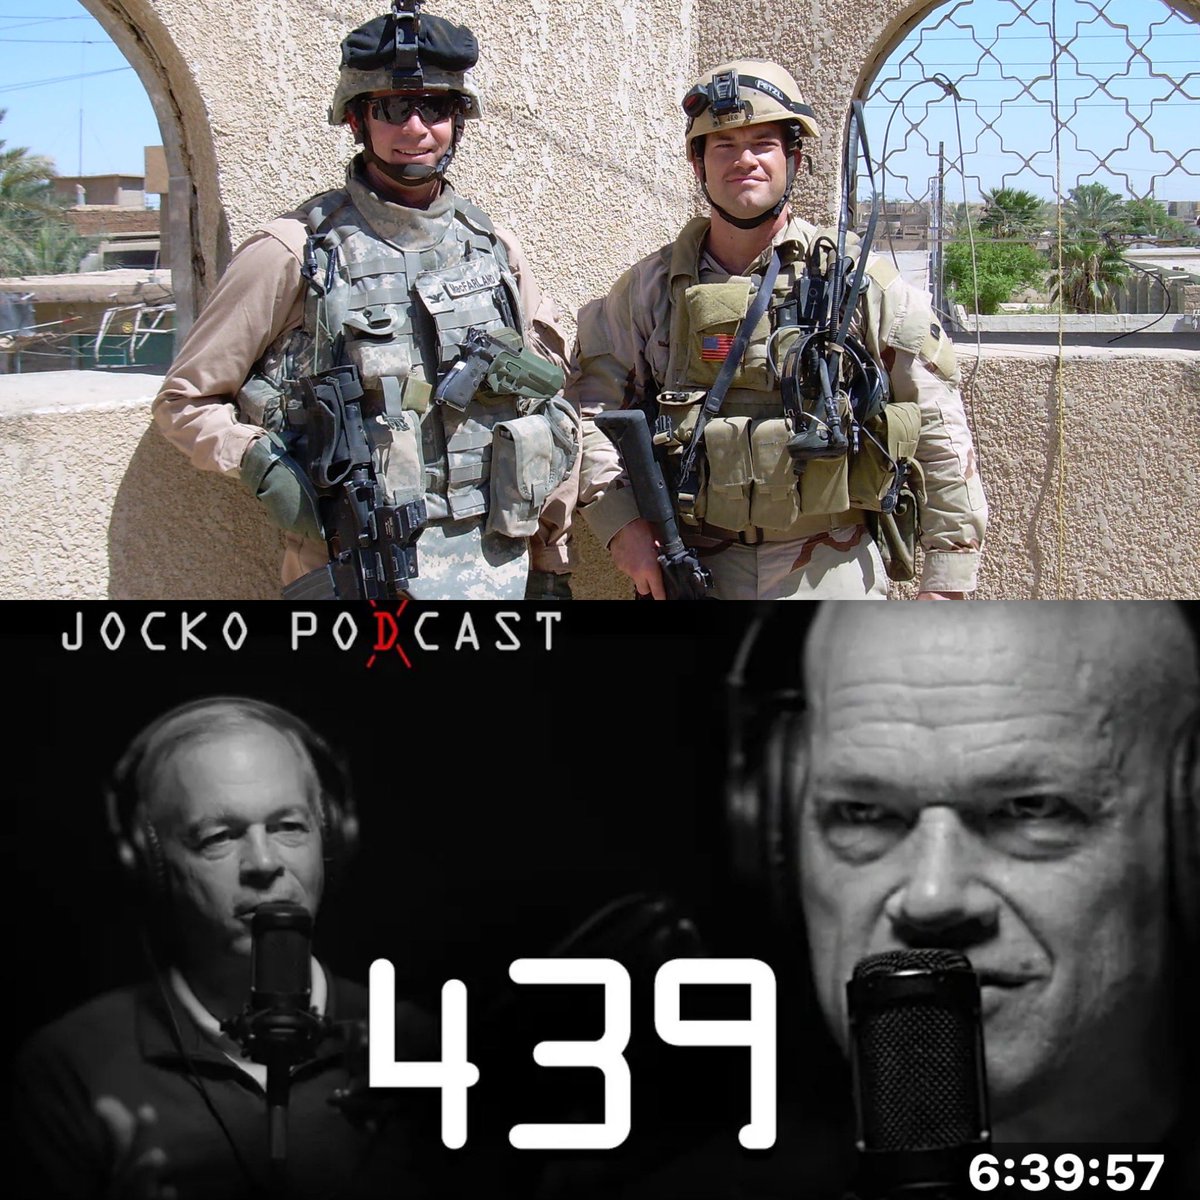 Jocko Podcast 439 is up with General Sean MacFarland, Commander of the Ready First Brigade during the Battle of Ramadi. He orchestrated the incredible counterinsurgency effort in that violent city against a determined enemy. General MacFarland led a force of American Soldiers,